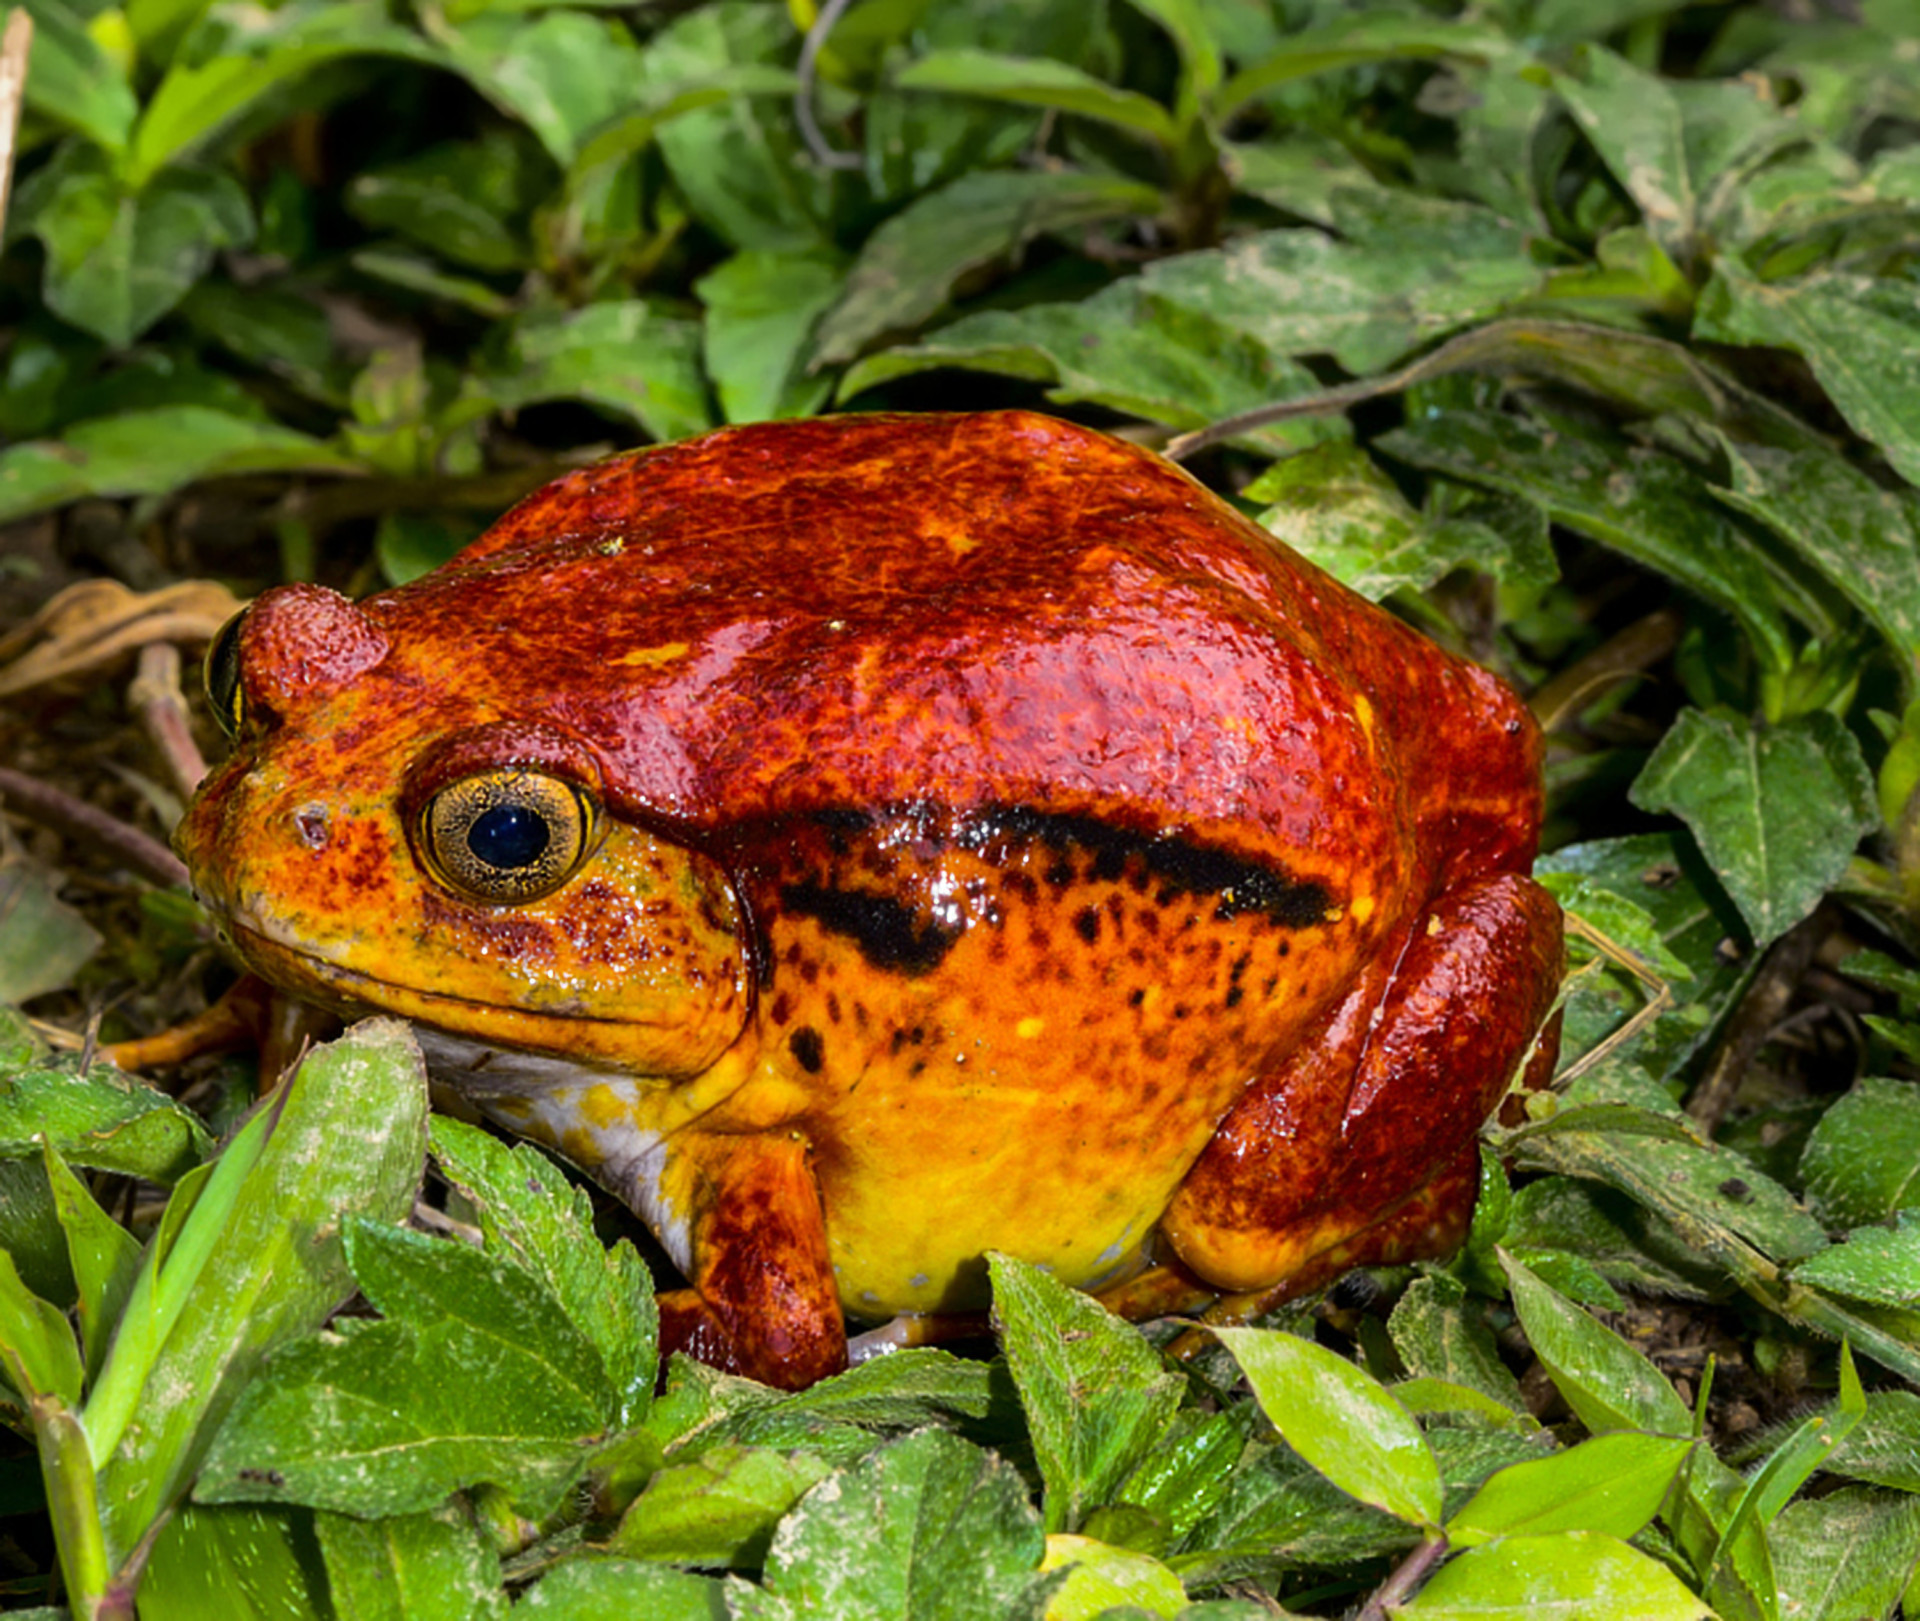 These flame-red and somewhat comedic <a href="https://uk.starsinsider.com/travel/264476/hop-on-discover-some-of-the-worlds-most-colorful-and-curious-looking-frogs" rel="noopener">amphibians</a> are an endangered species.<p>You may also like:<a href="https://www.starsinsider.com/n/182465?utm_source=msn.com&utm_medium=display&utm_campaign=referral_description&utm_content=265328v11en-us"> Transgender people who helped shape history</a></p>